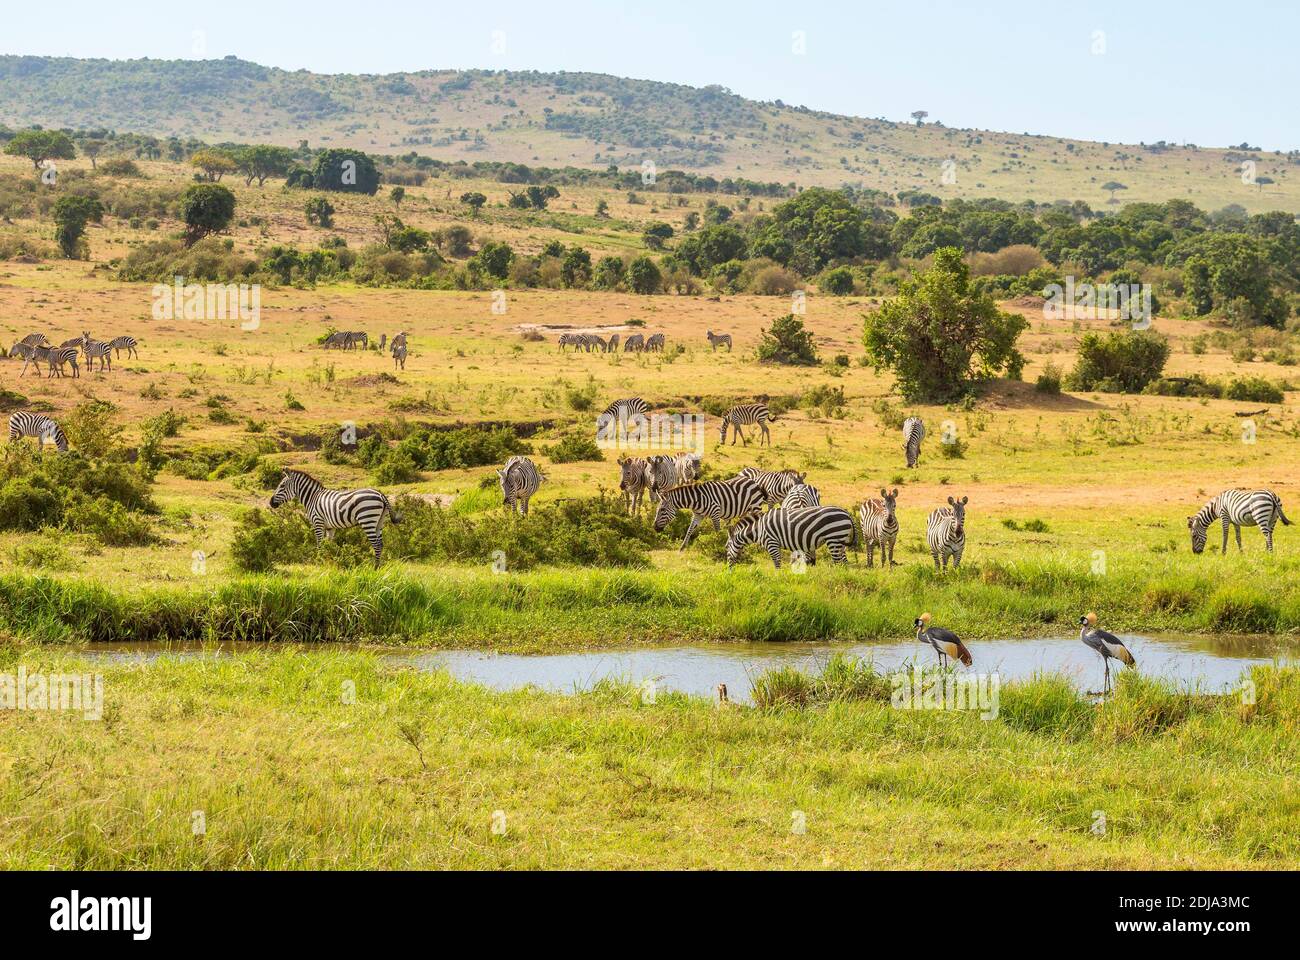 Zebras and cranes at a watering hole in the savanna Stock Photo